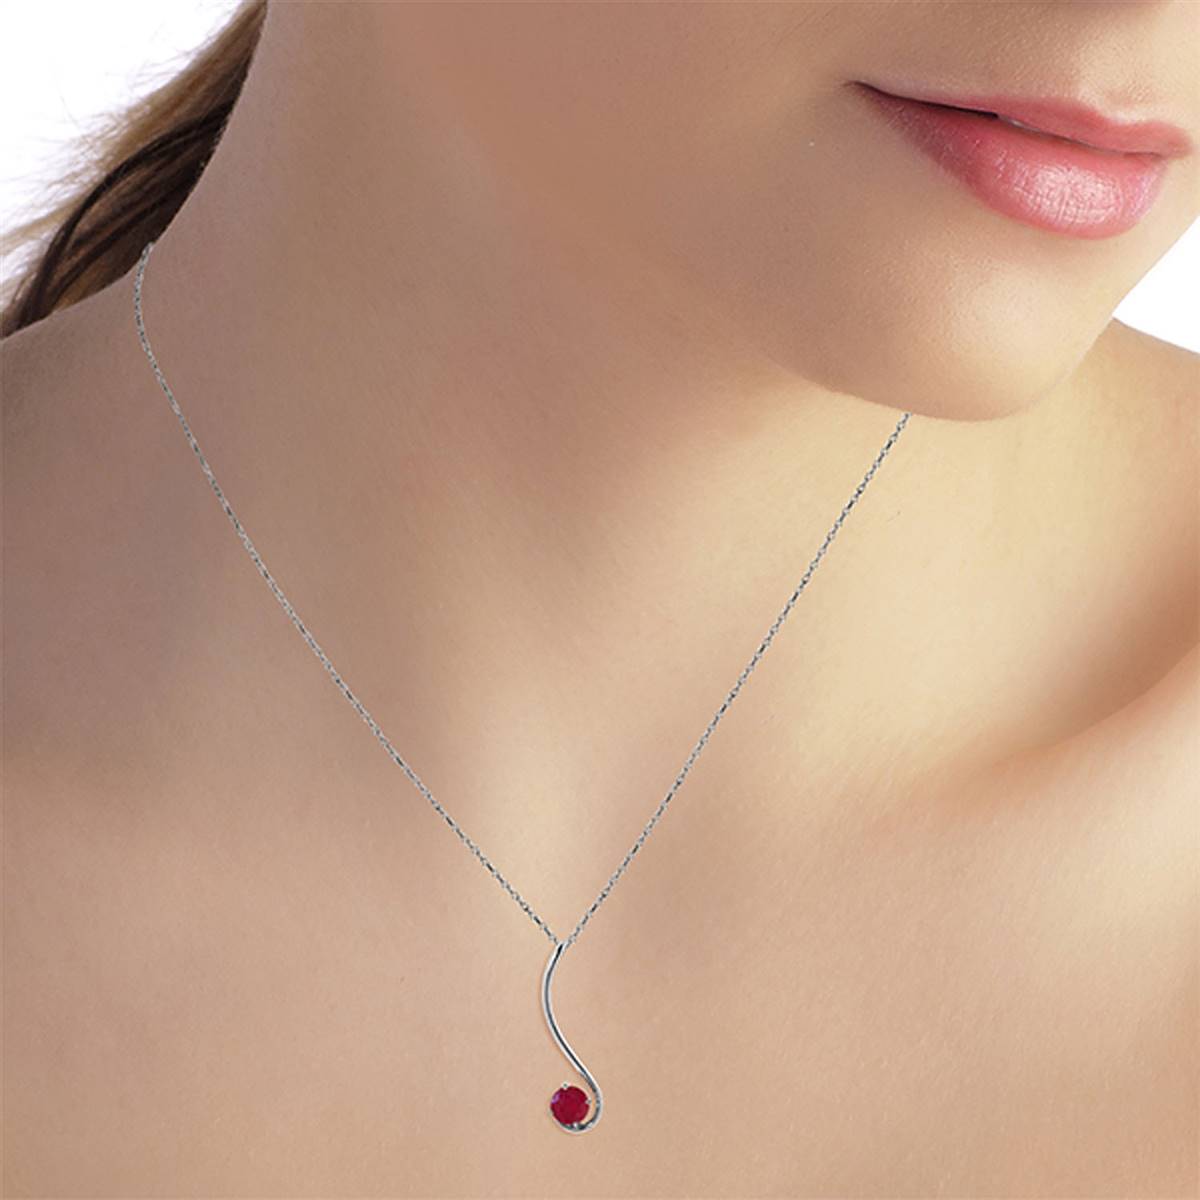 0.55 Carat 14K Solid White Gold This Shows How Ruby Necklace